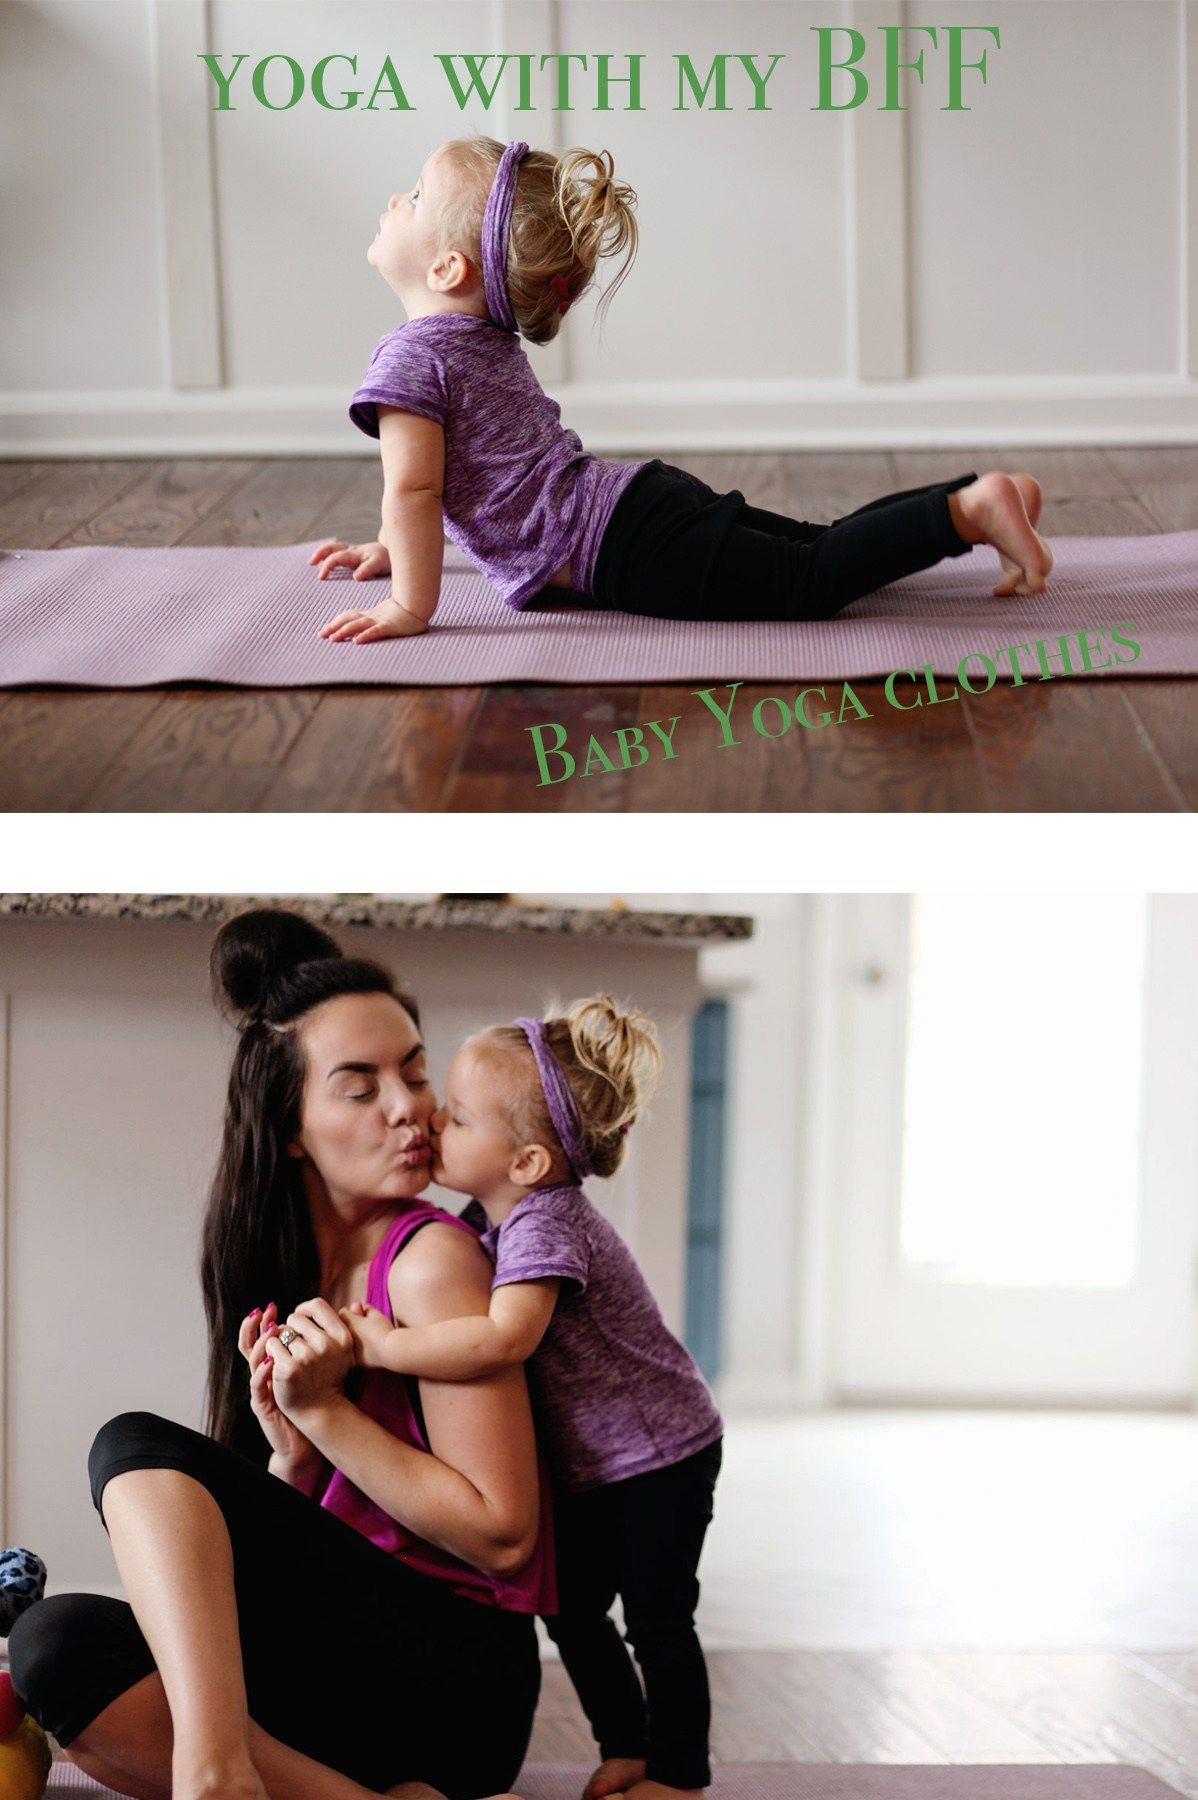 My workout BFF -   fitness Clothes for kids